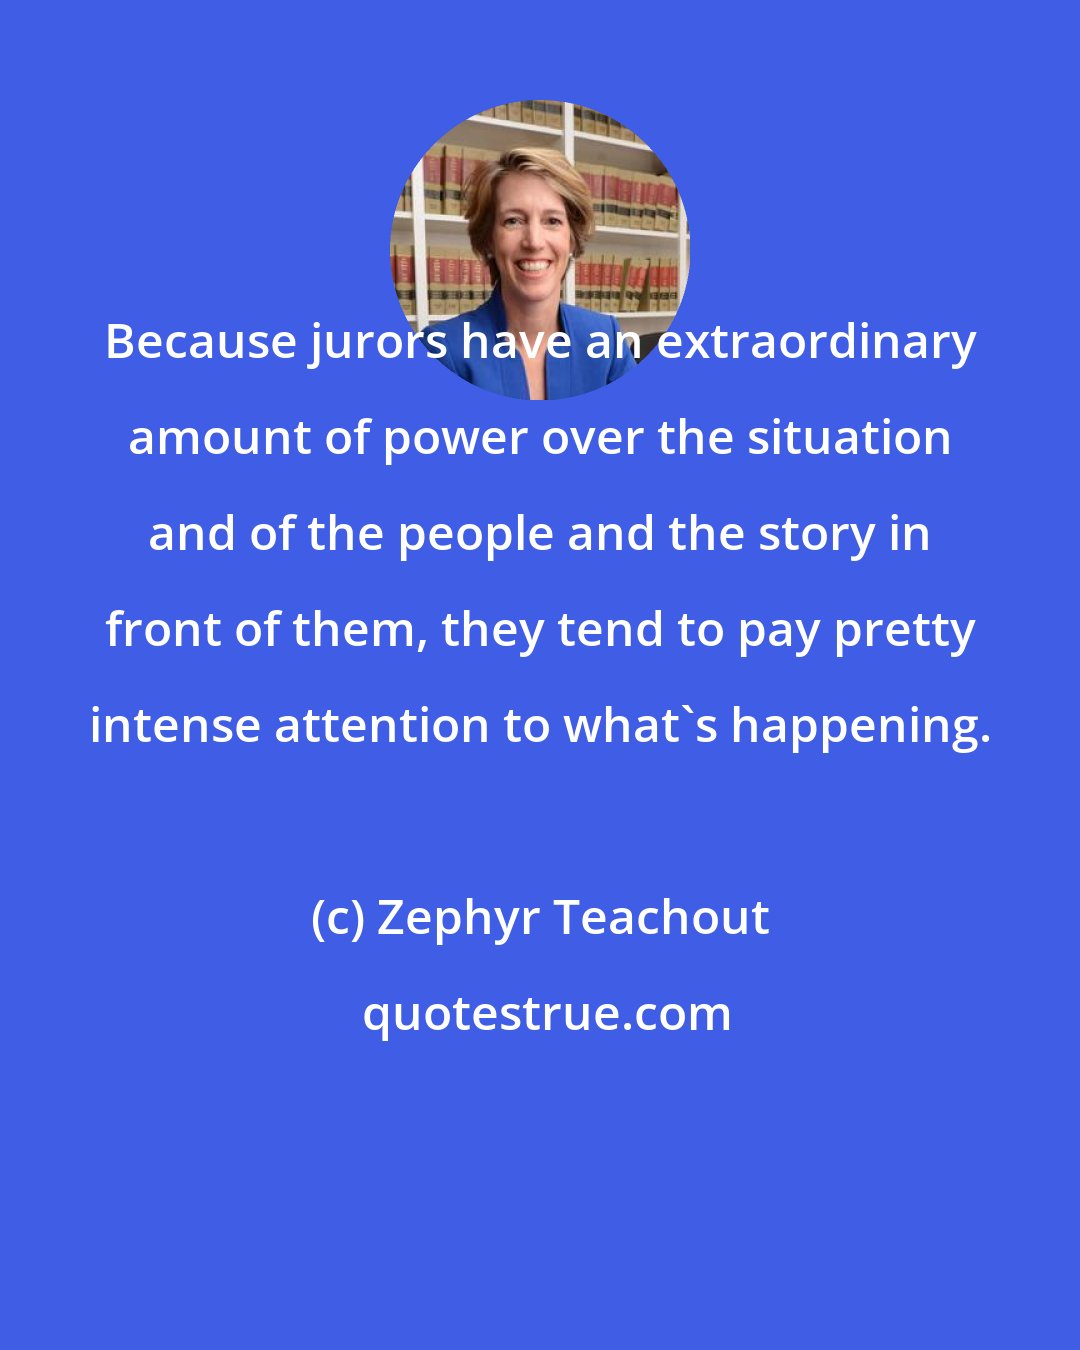 Zephyr Teachout: Because jurors have an extraordinary amount of power over the situation and of the people and the story in front of them, they tend to pay pretty intense attention to what's happening.